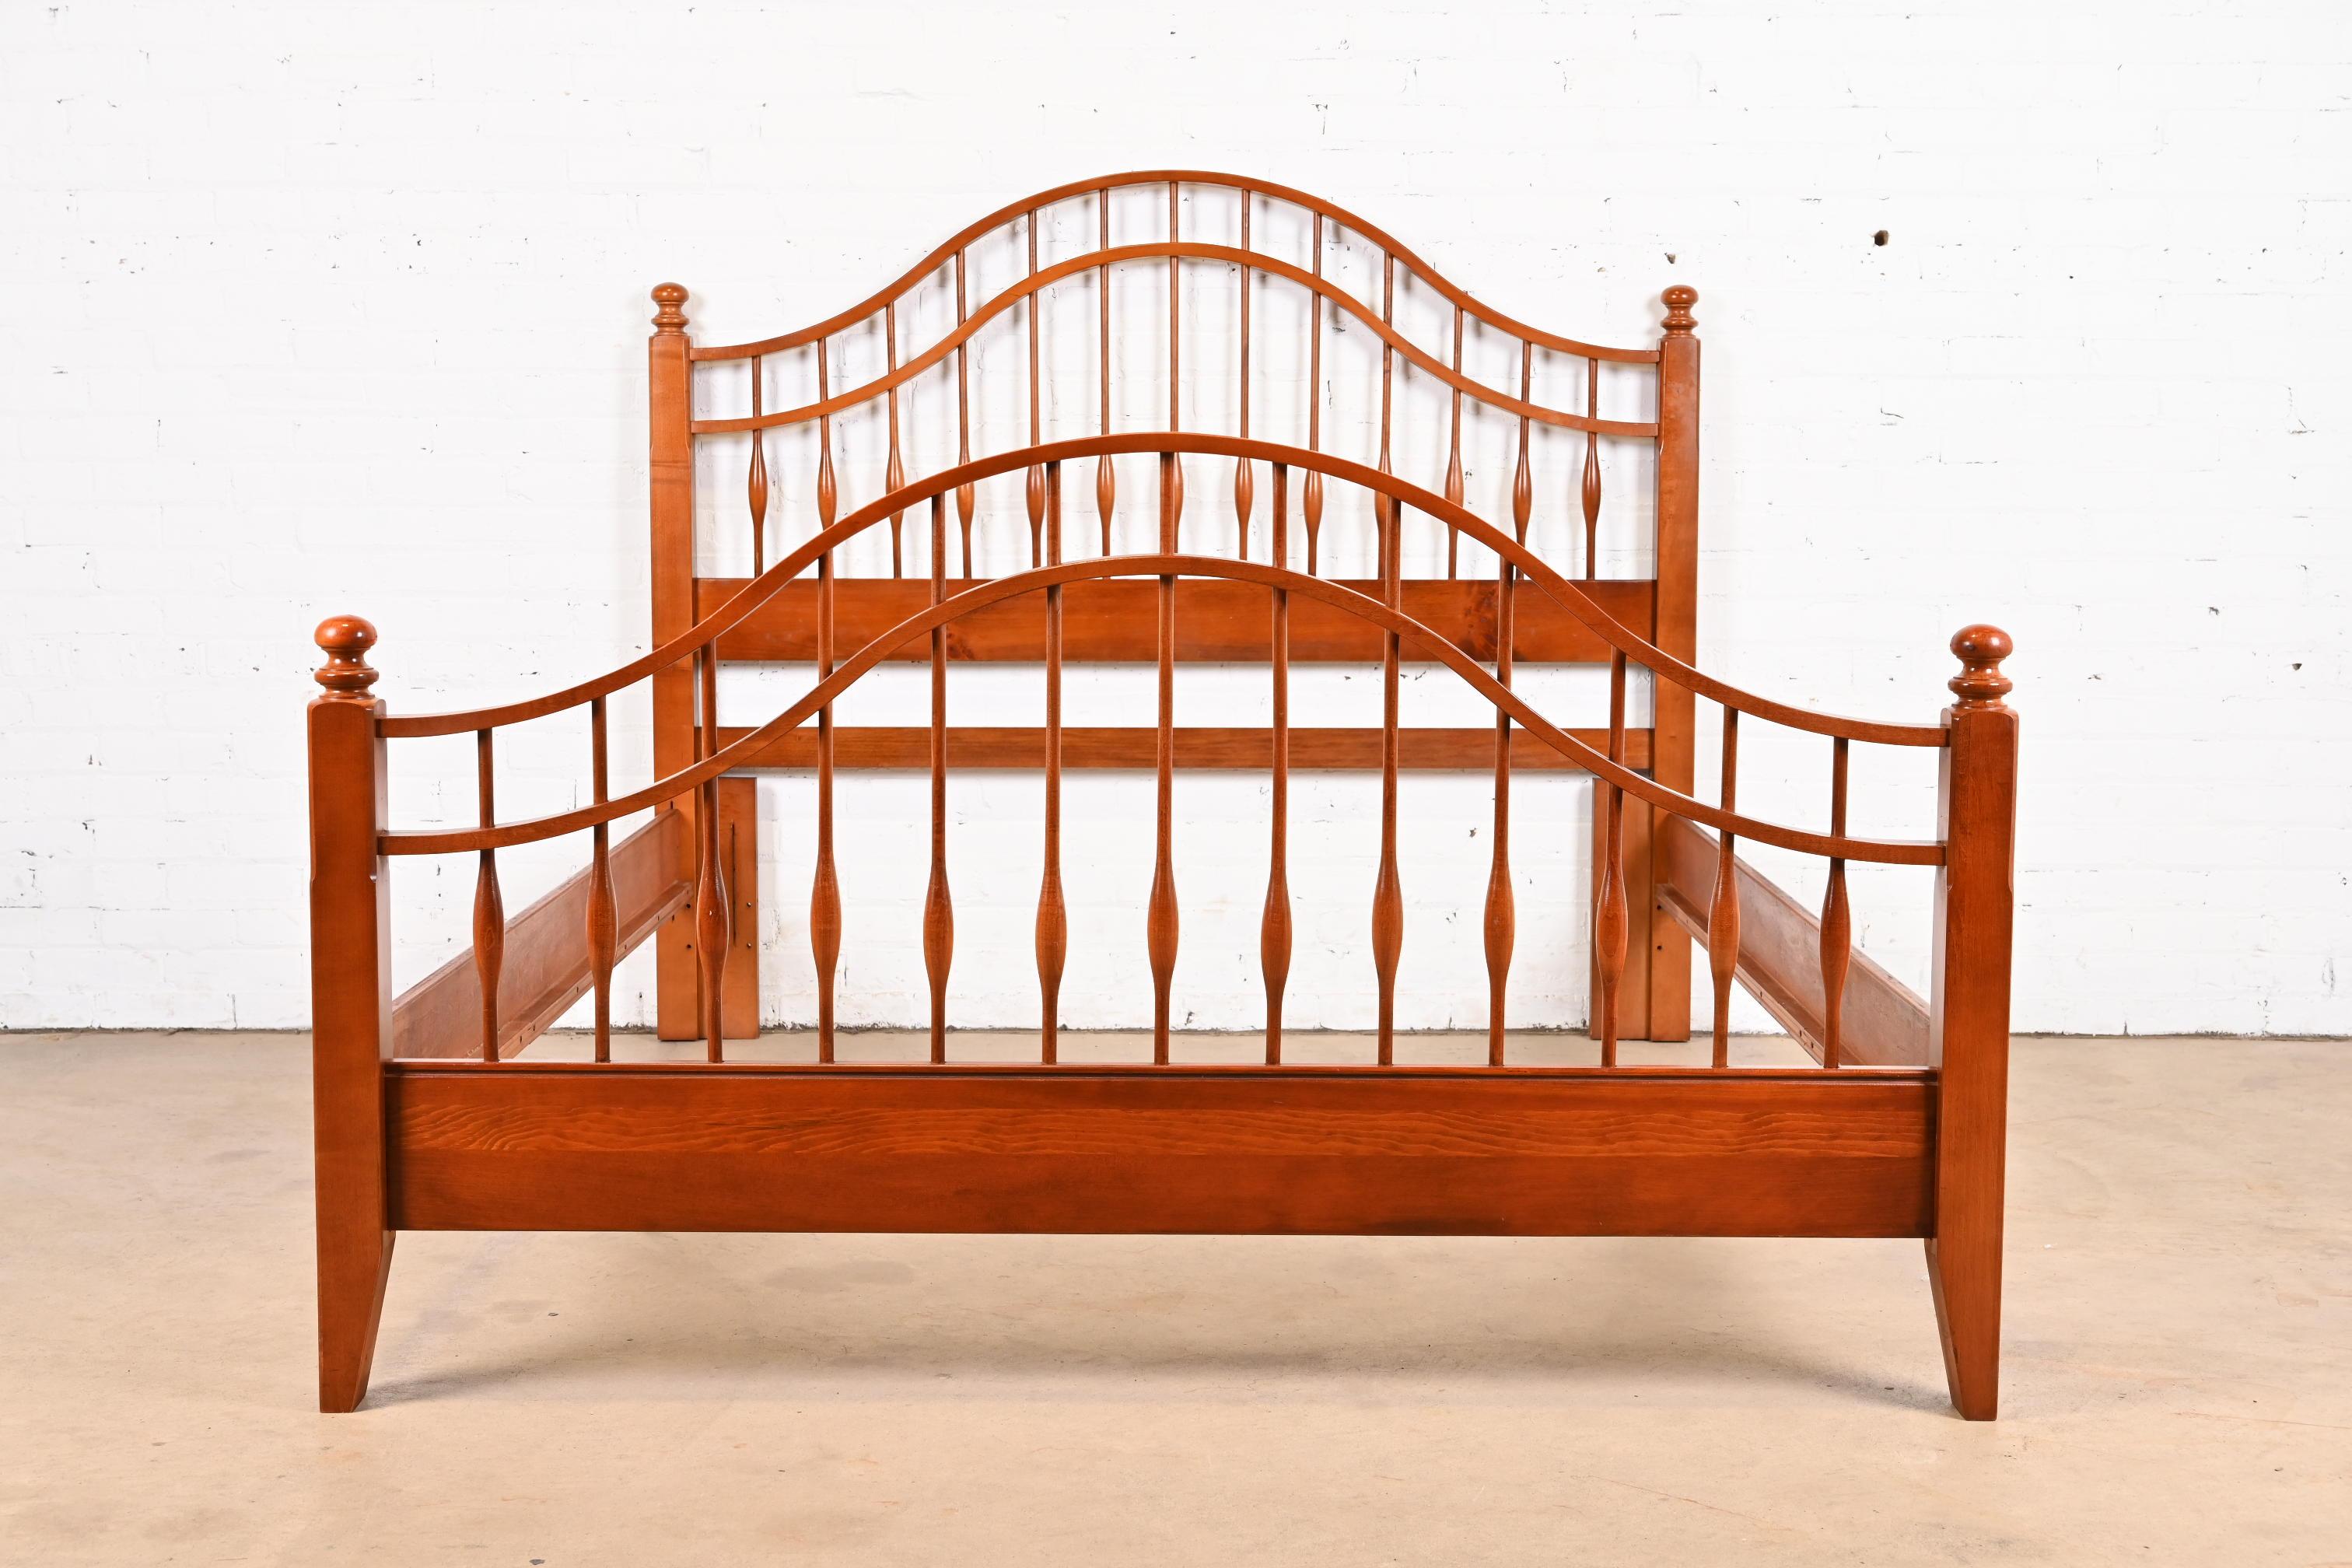 A gorgeous American Colonial or Craftsman style carved cherry wood queen size windsor spindle bed frame

USA, Late 20th century

Measures: 63